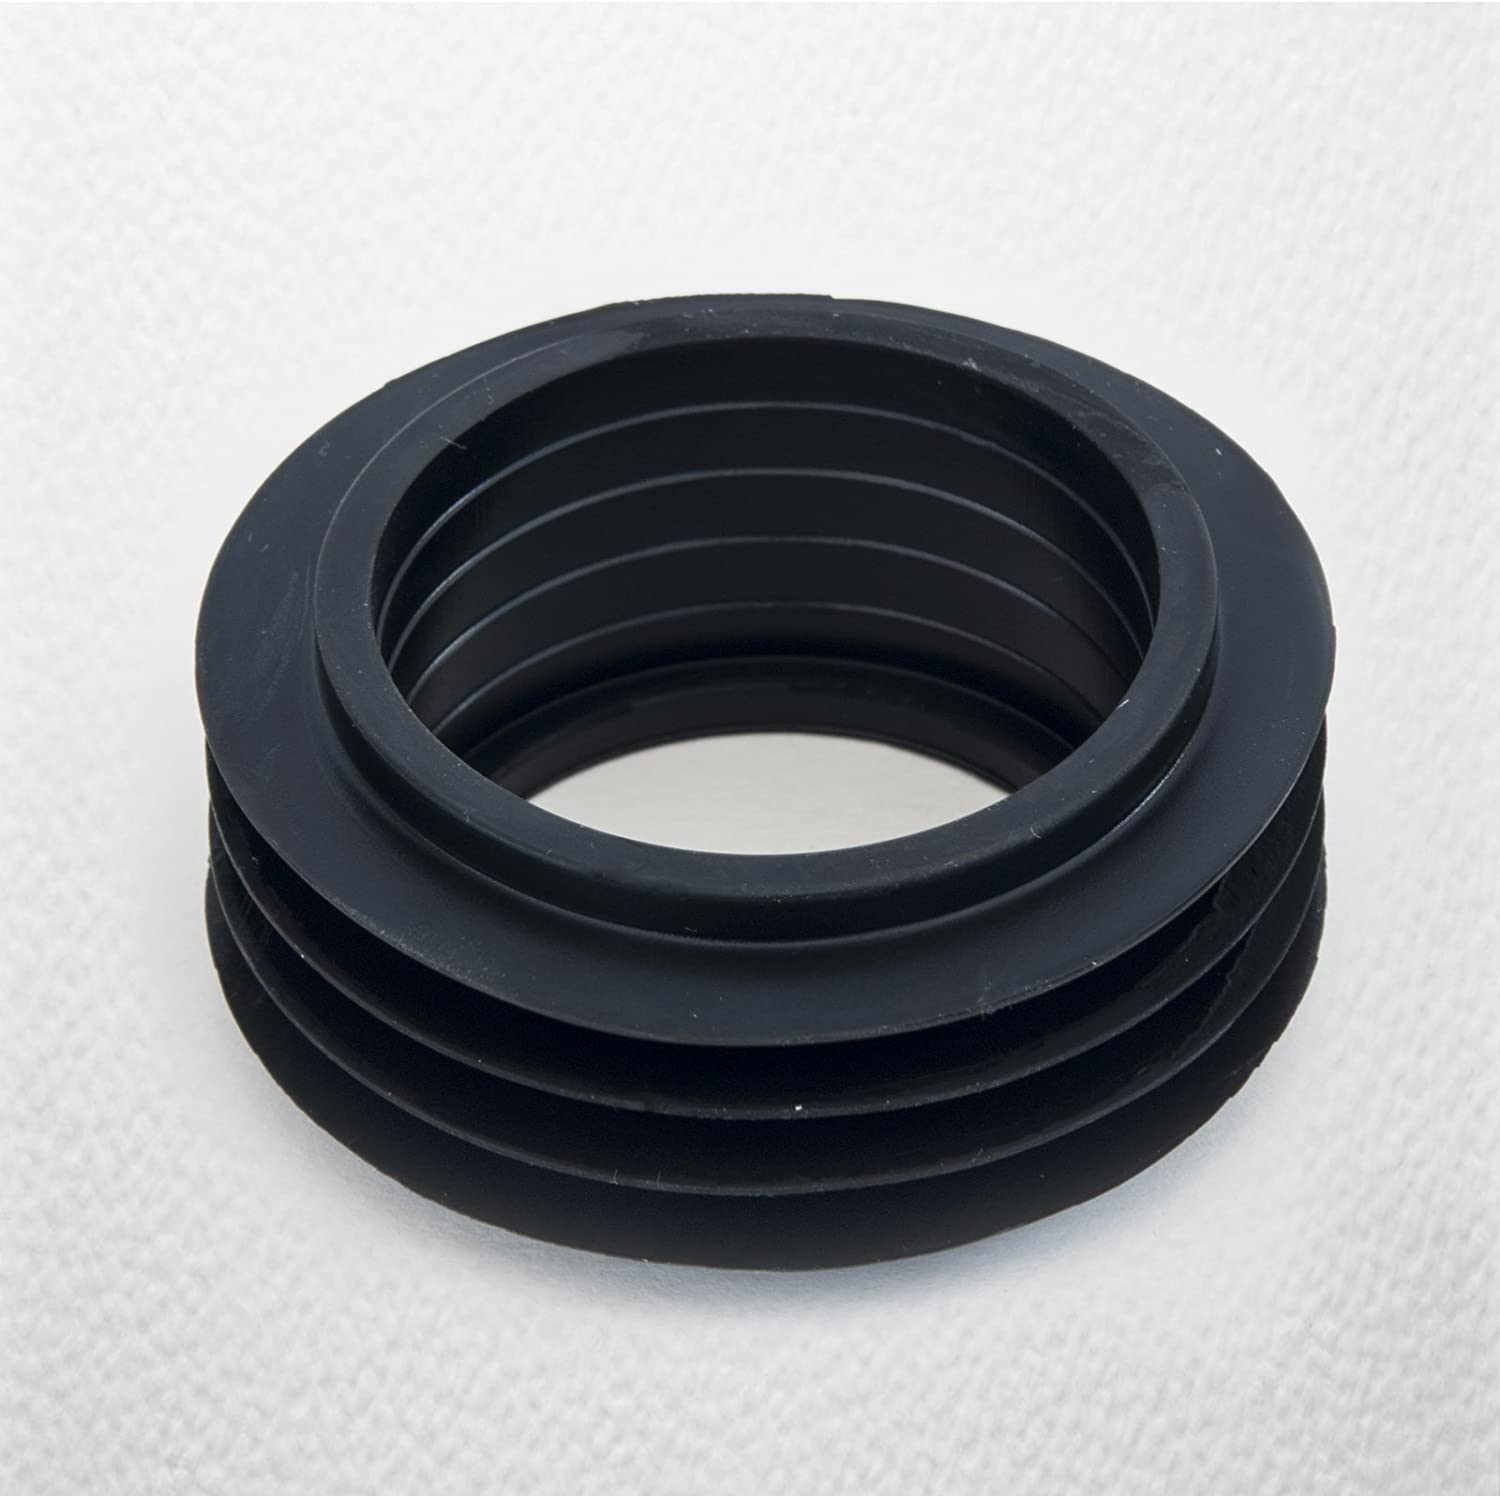 Geberit Internal Low Level Flush Pipe Rubber cone Seal for 40mm Concealed Bend 119.668.00.1